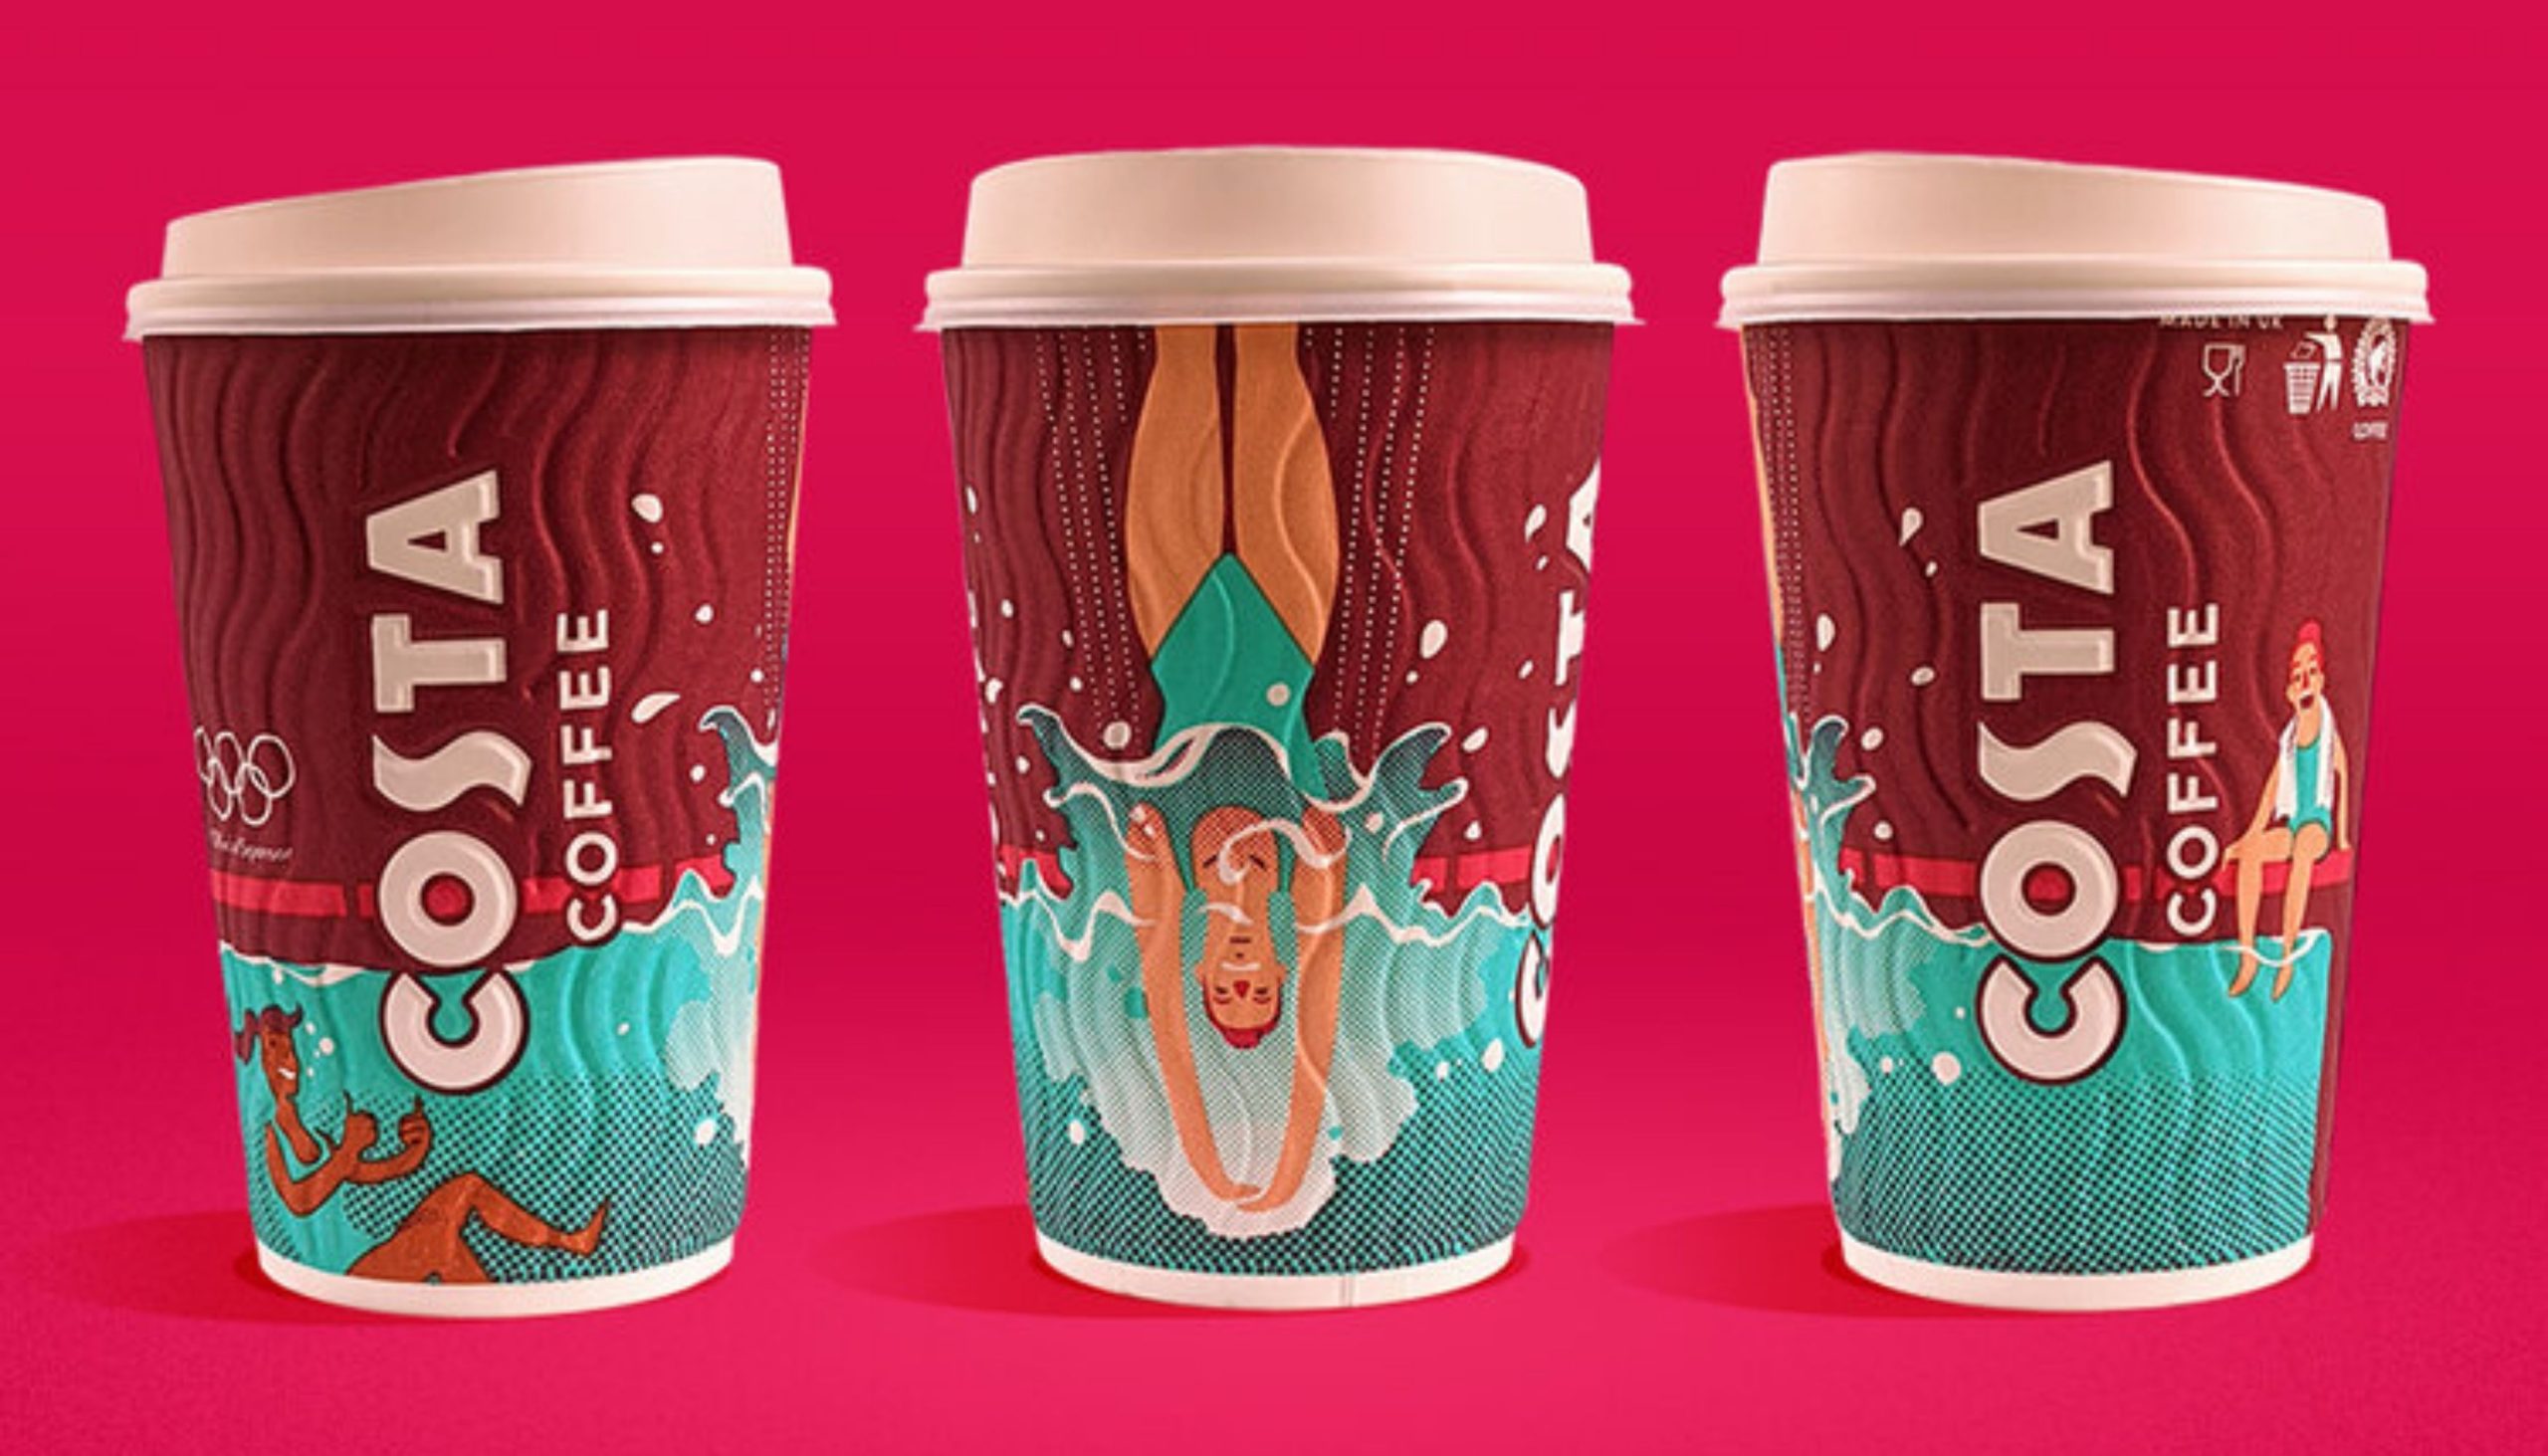 How cool are these Costa Olympics Cups created for the Tokyo 2020 Games?